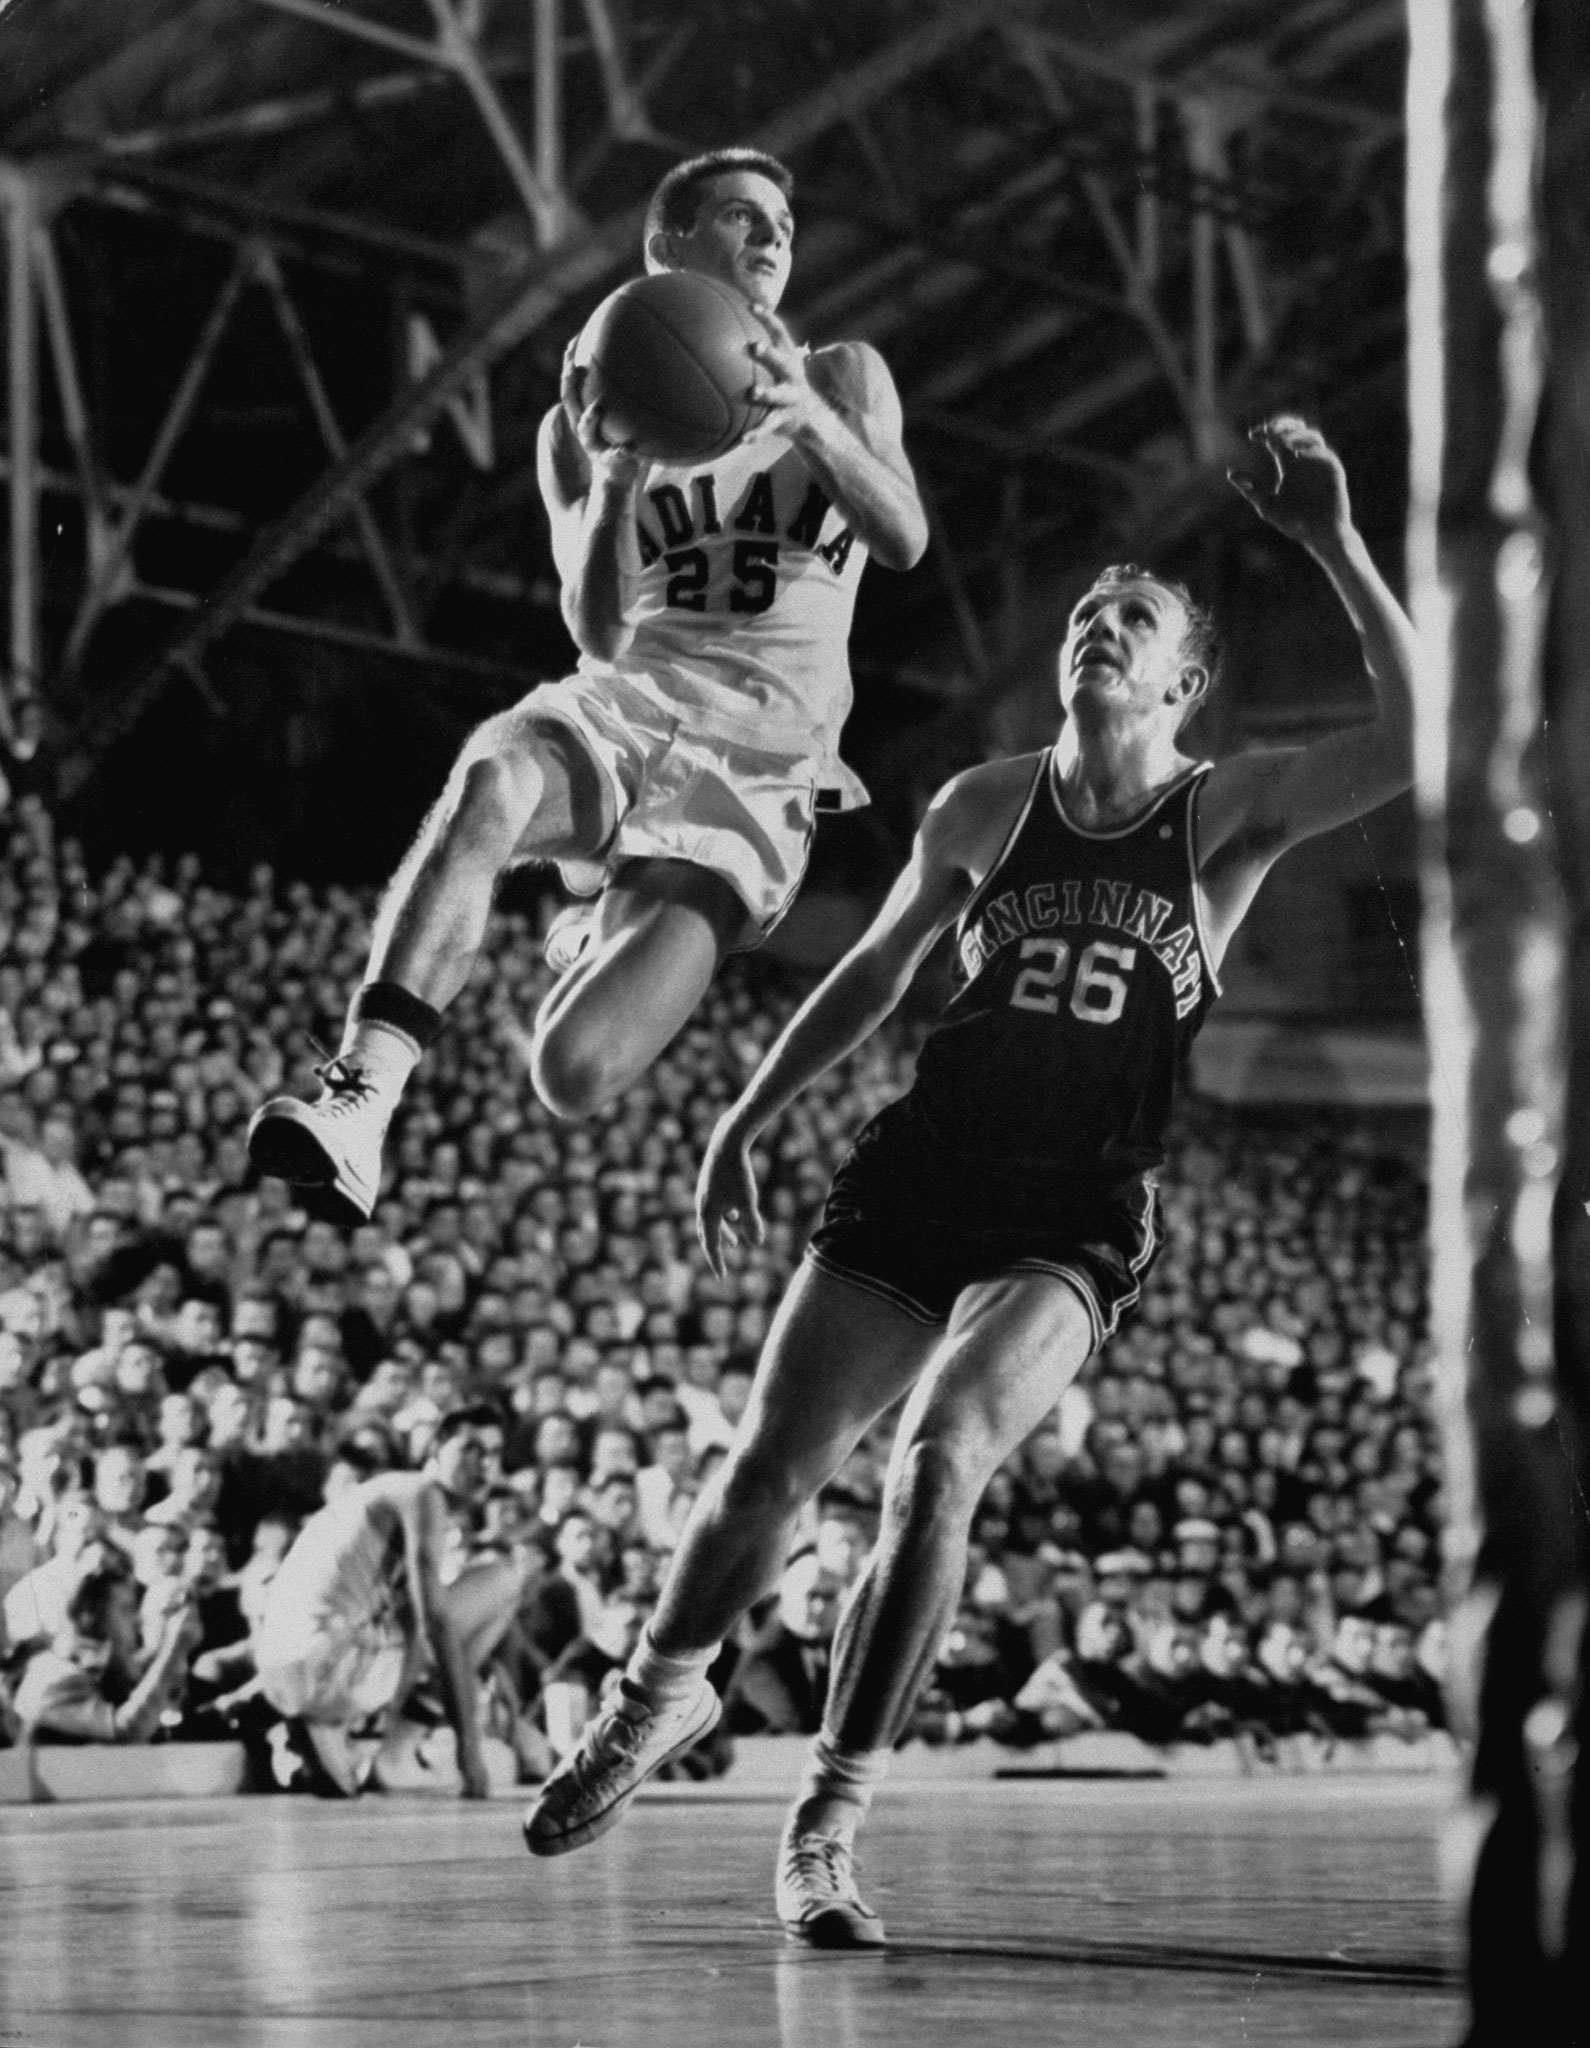 Burke Scott (above, with ball) was a starter on Indiana's 1953 NCAA championship team, the second of Indiana's five title winners.